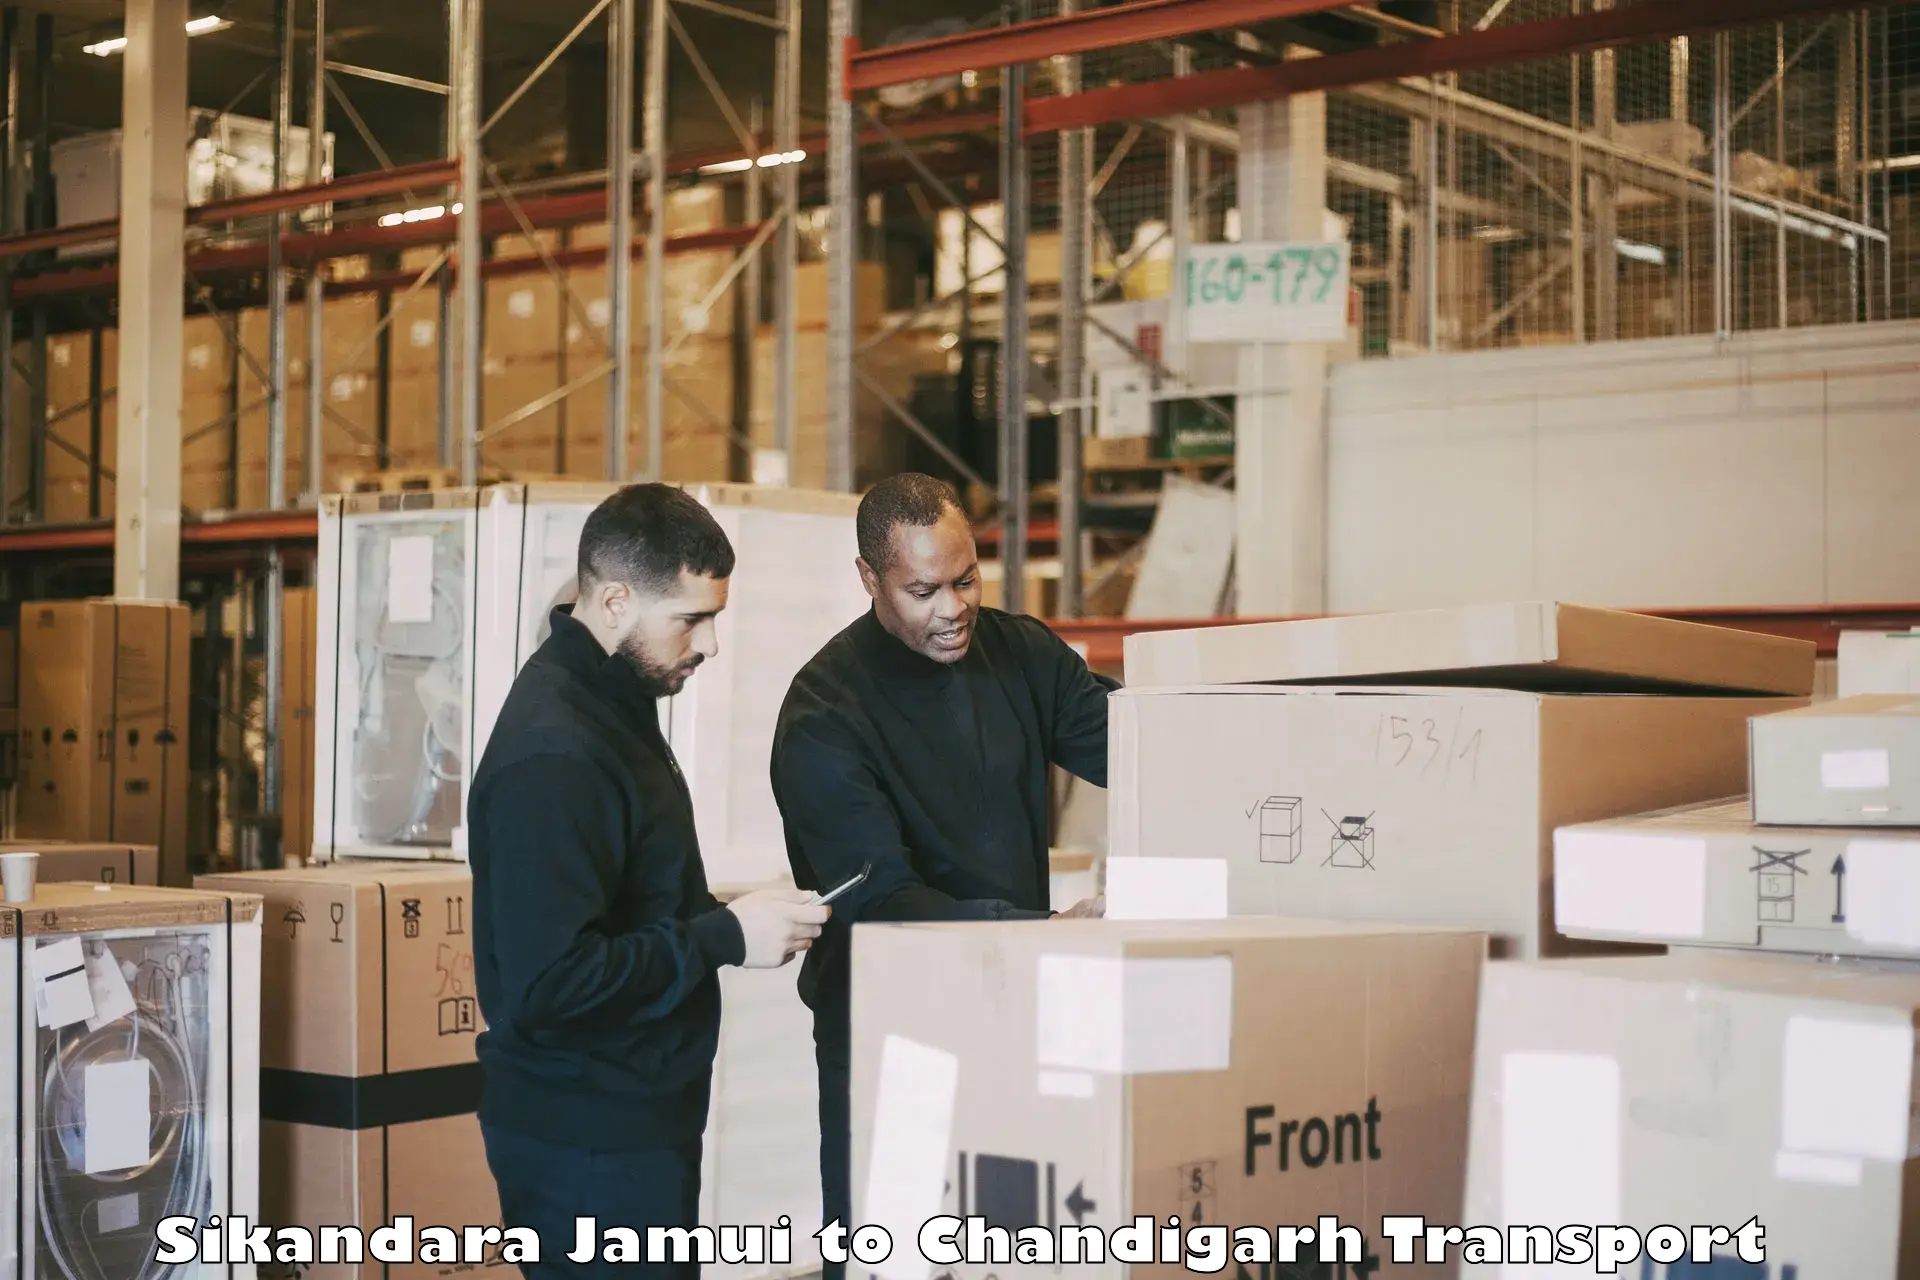 Parcel transport services Sikandara Jamui to Chandigarh